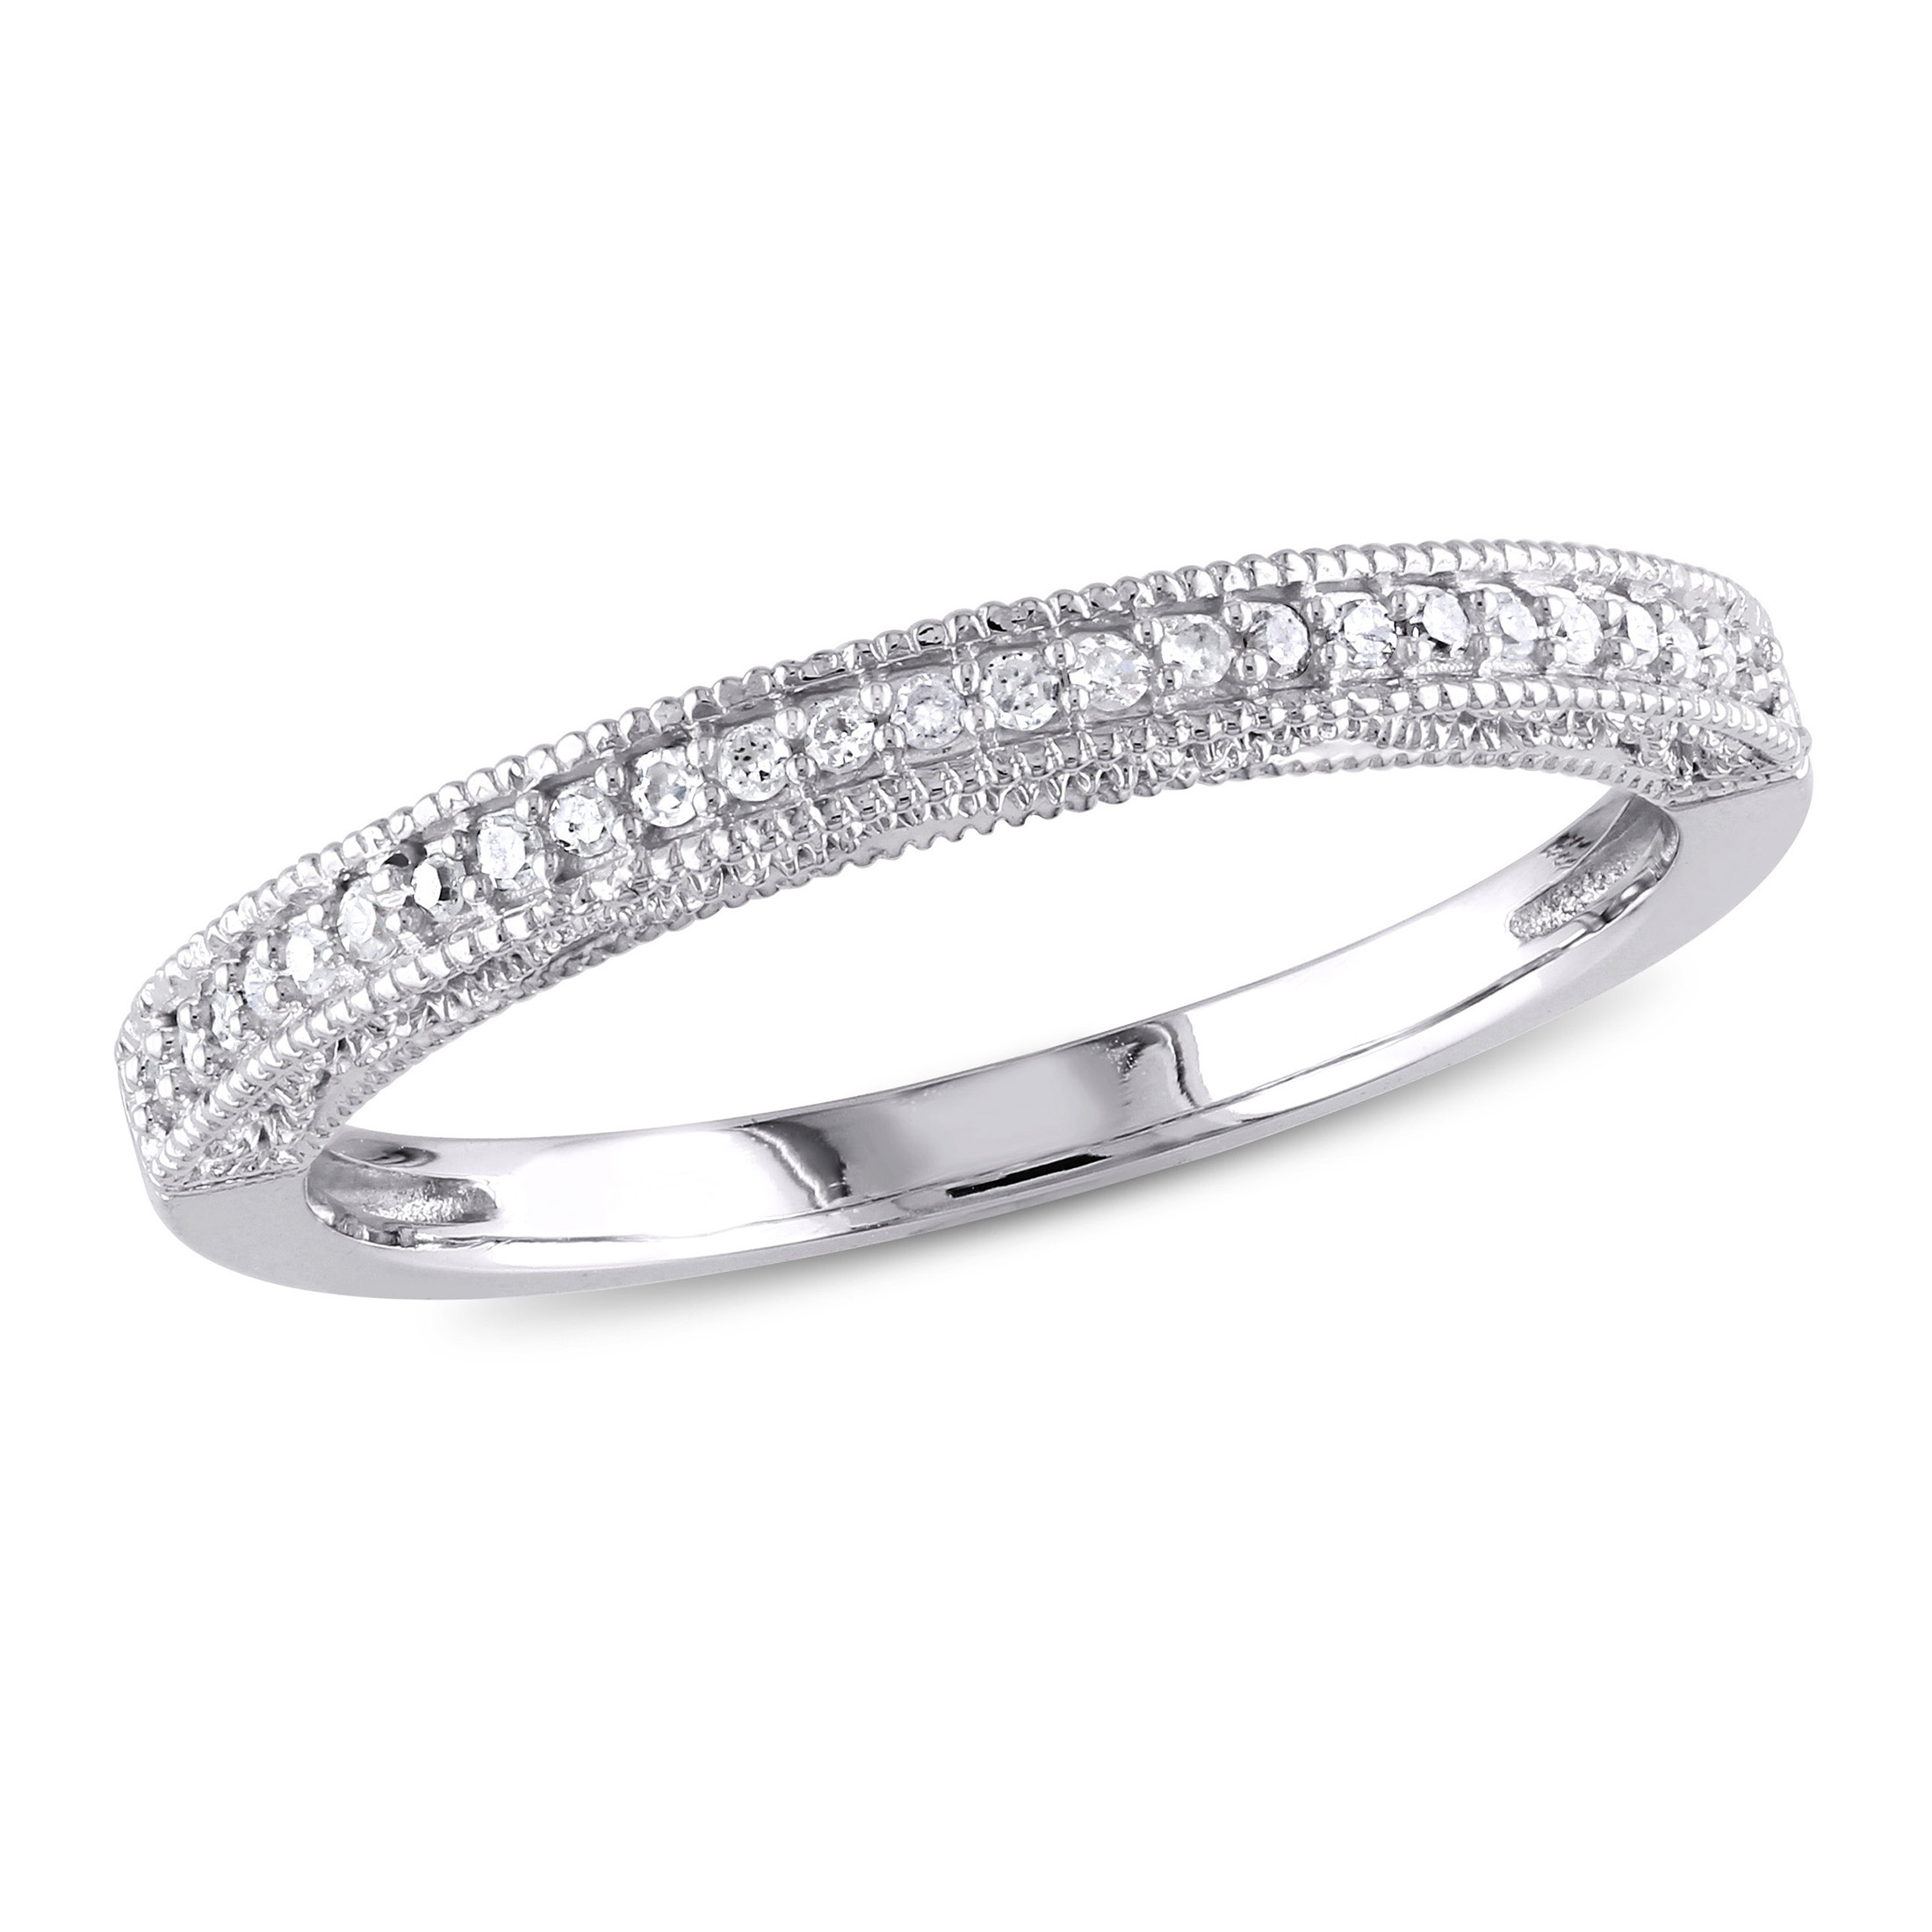 Everly Women's Bridal Engagement Anniversary 1/10 CT T.W. Round-Cut Diamond 10kt White Gold Semi-Eternity Ring with Milgrain Detail and Pave Setting (G-H, I2-I3) - image 1 of 9